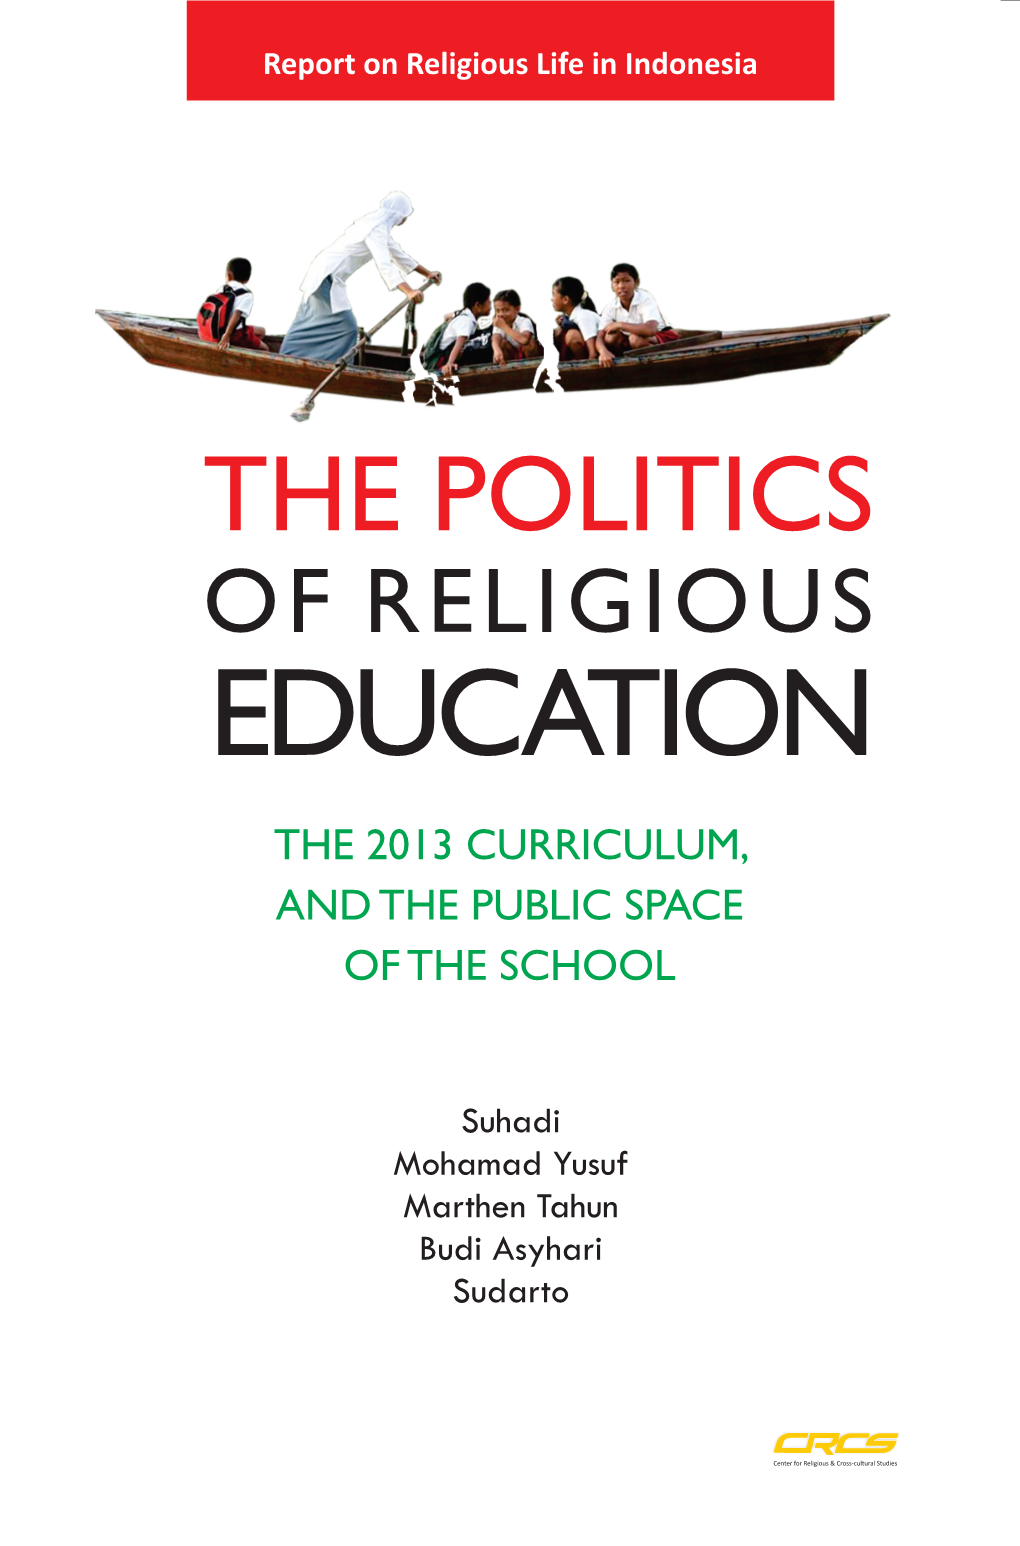 The Politics of Religious Education, the 2013 Curriculum, and the Public Space of the School